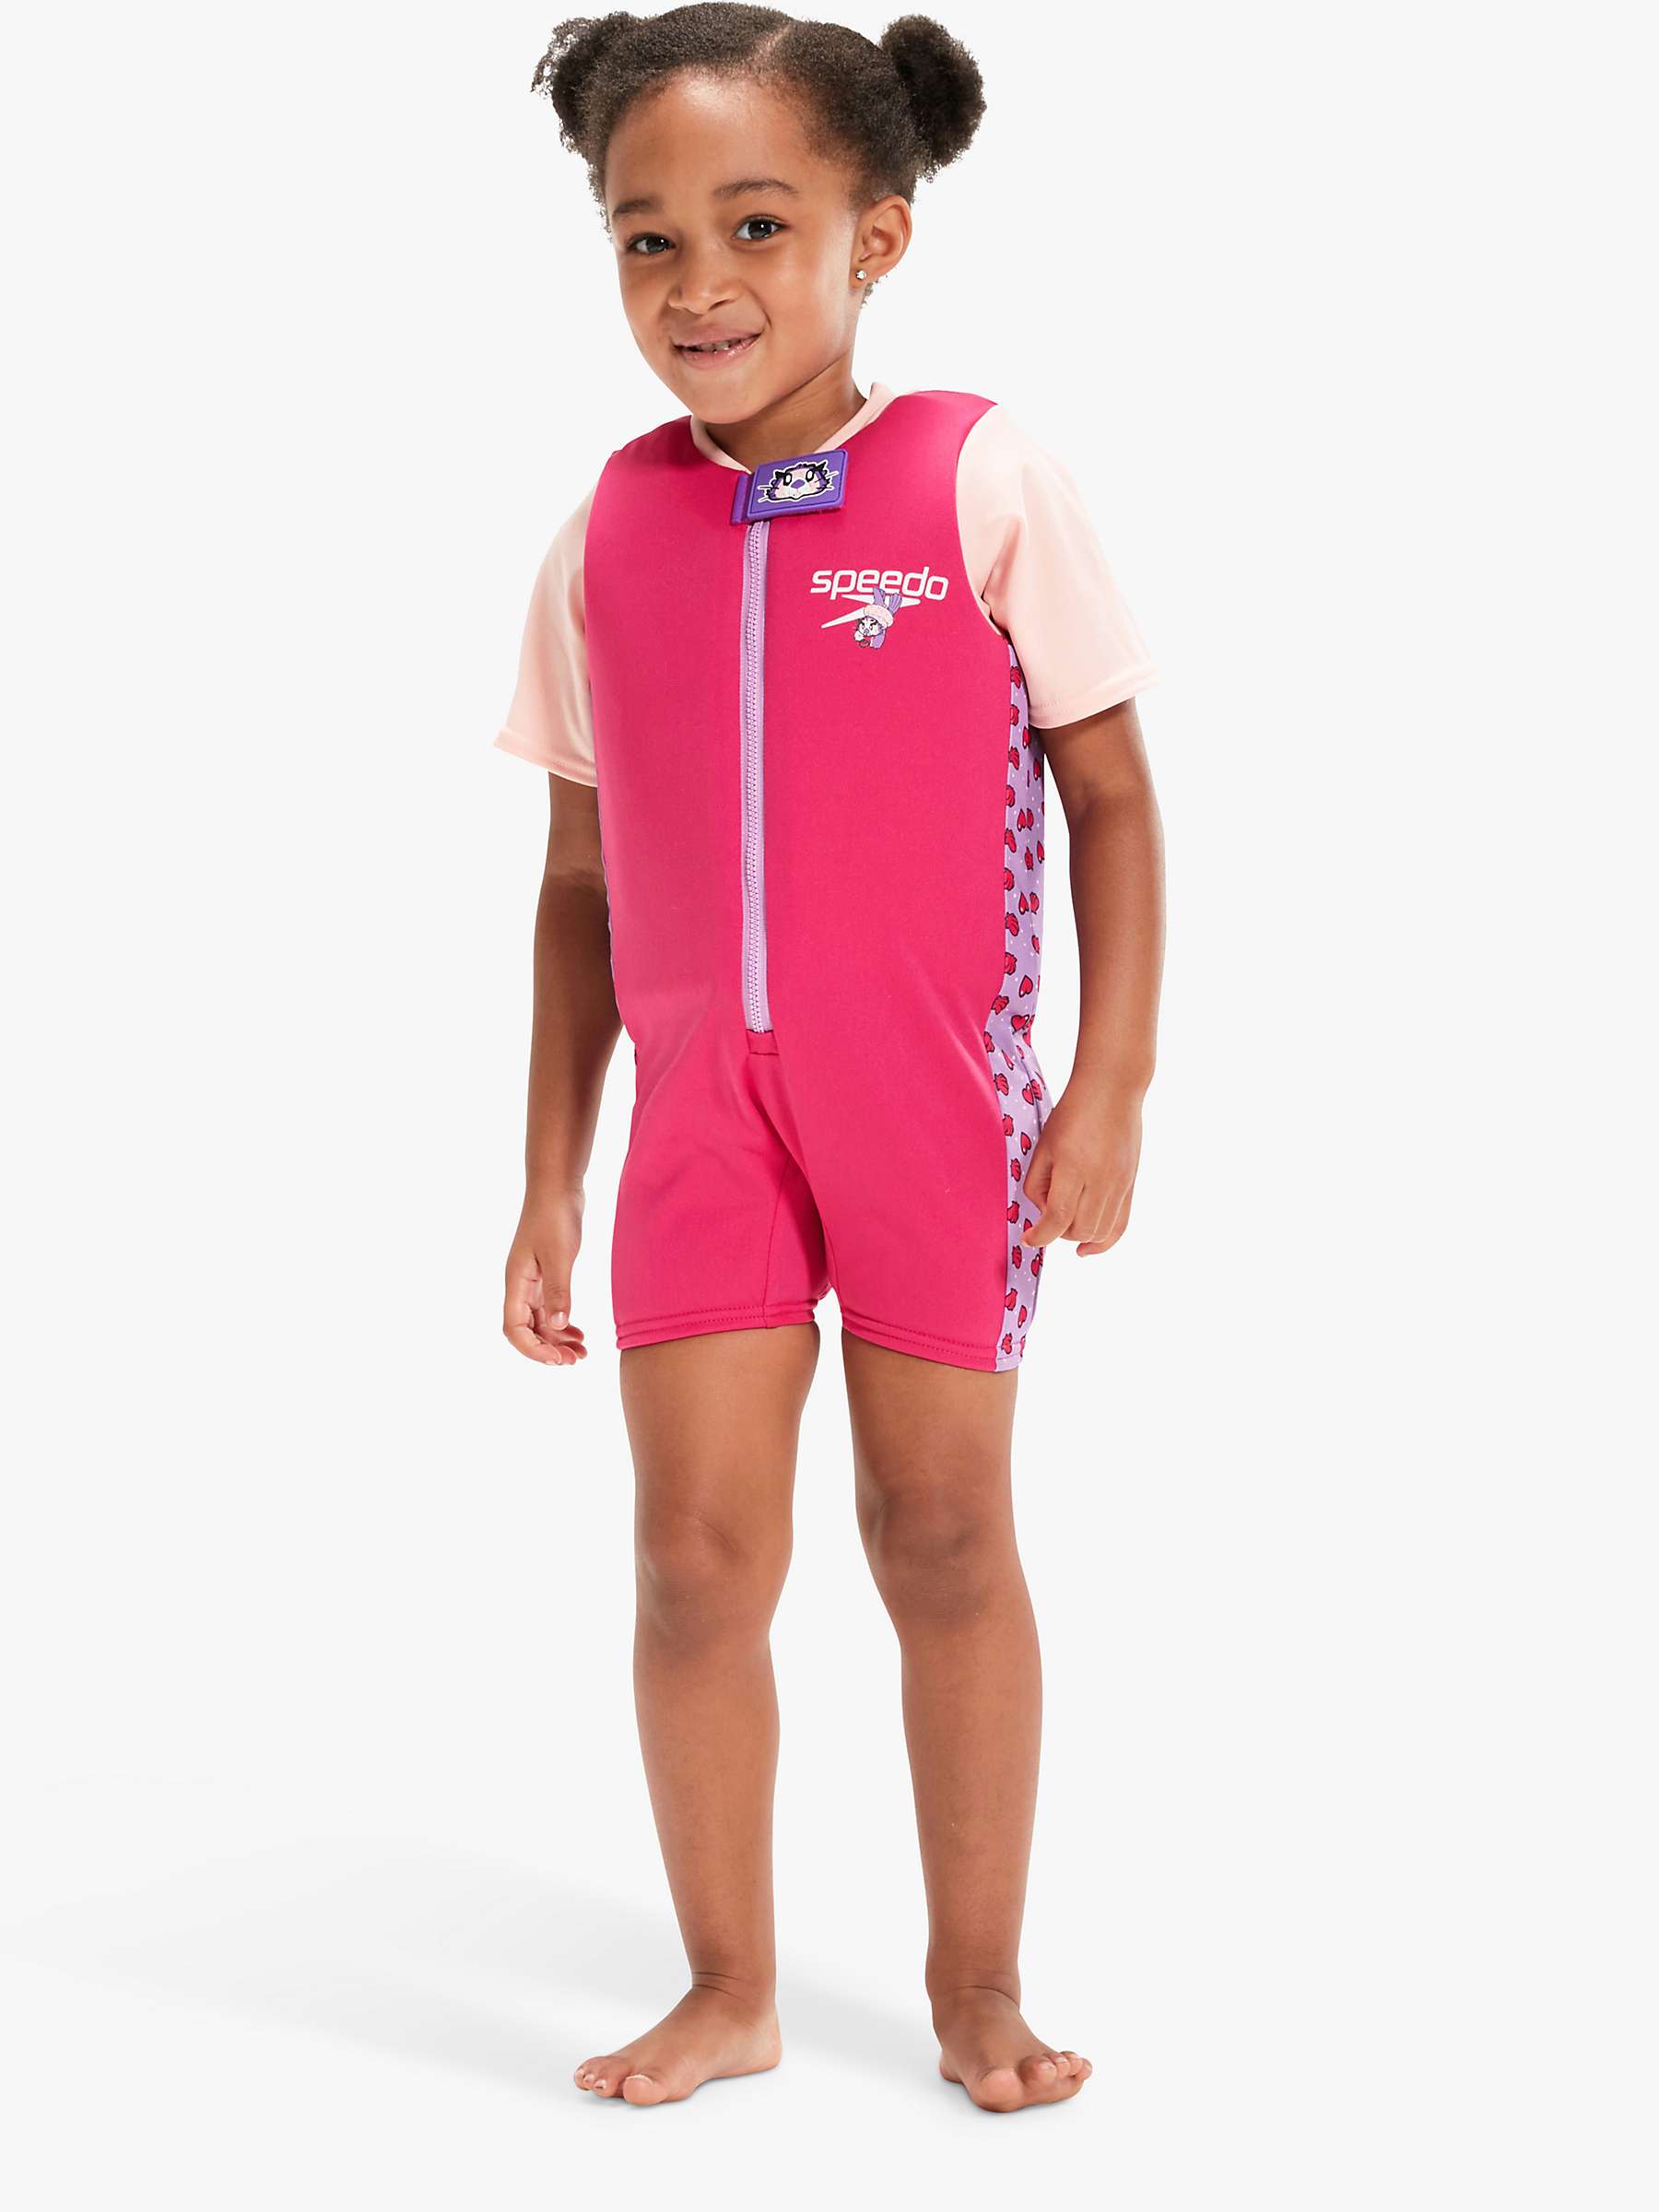 Buy Speedo Baby Seal Floatsuit, Miami Lilac/Cherry Online at johnlewis.com